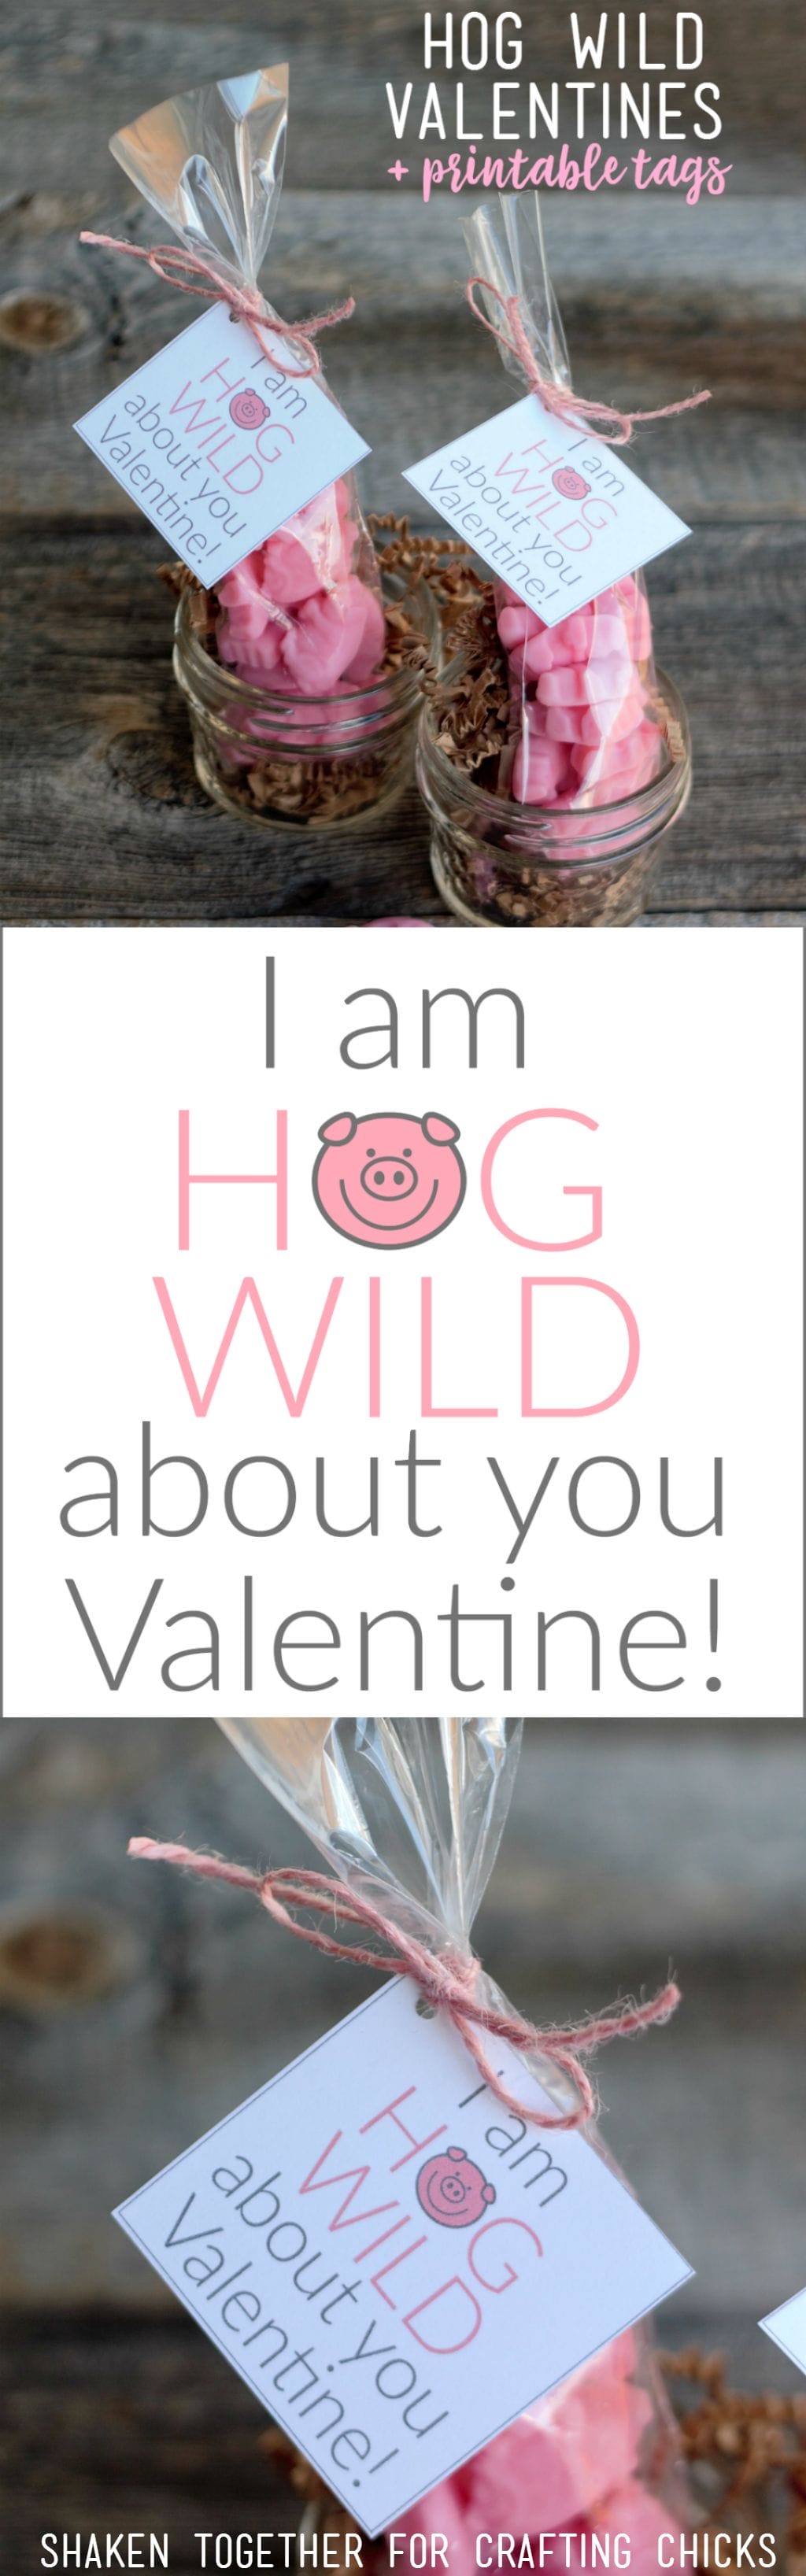 Gummy pigs + printable tags make the cutest I Am Hog Wild About You Valentines! These easy, affordable Valentines are fun for classmates, friends & family!